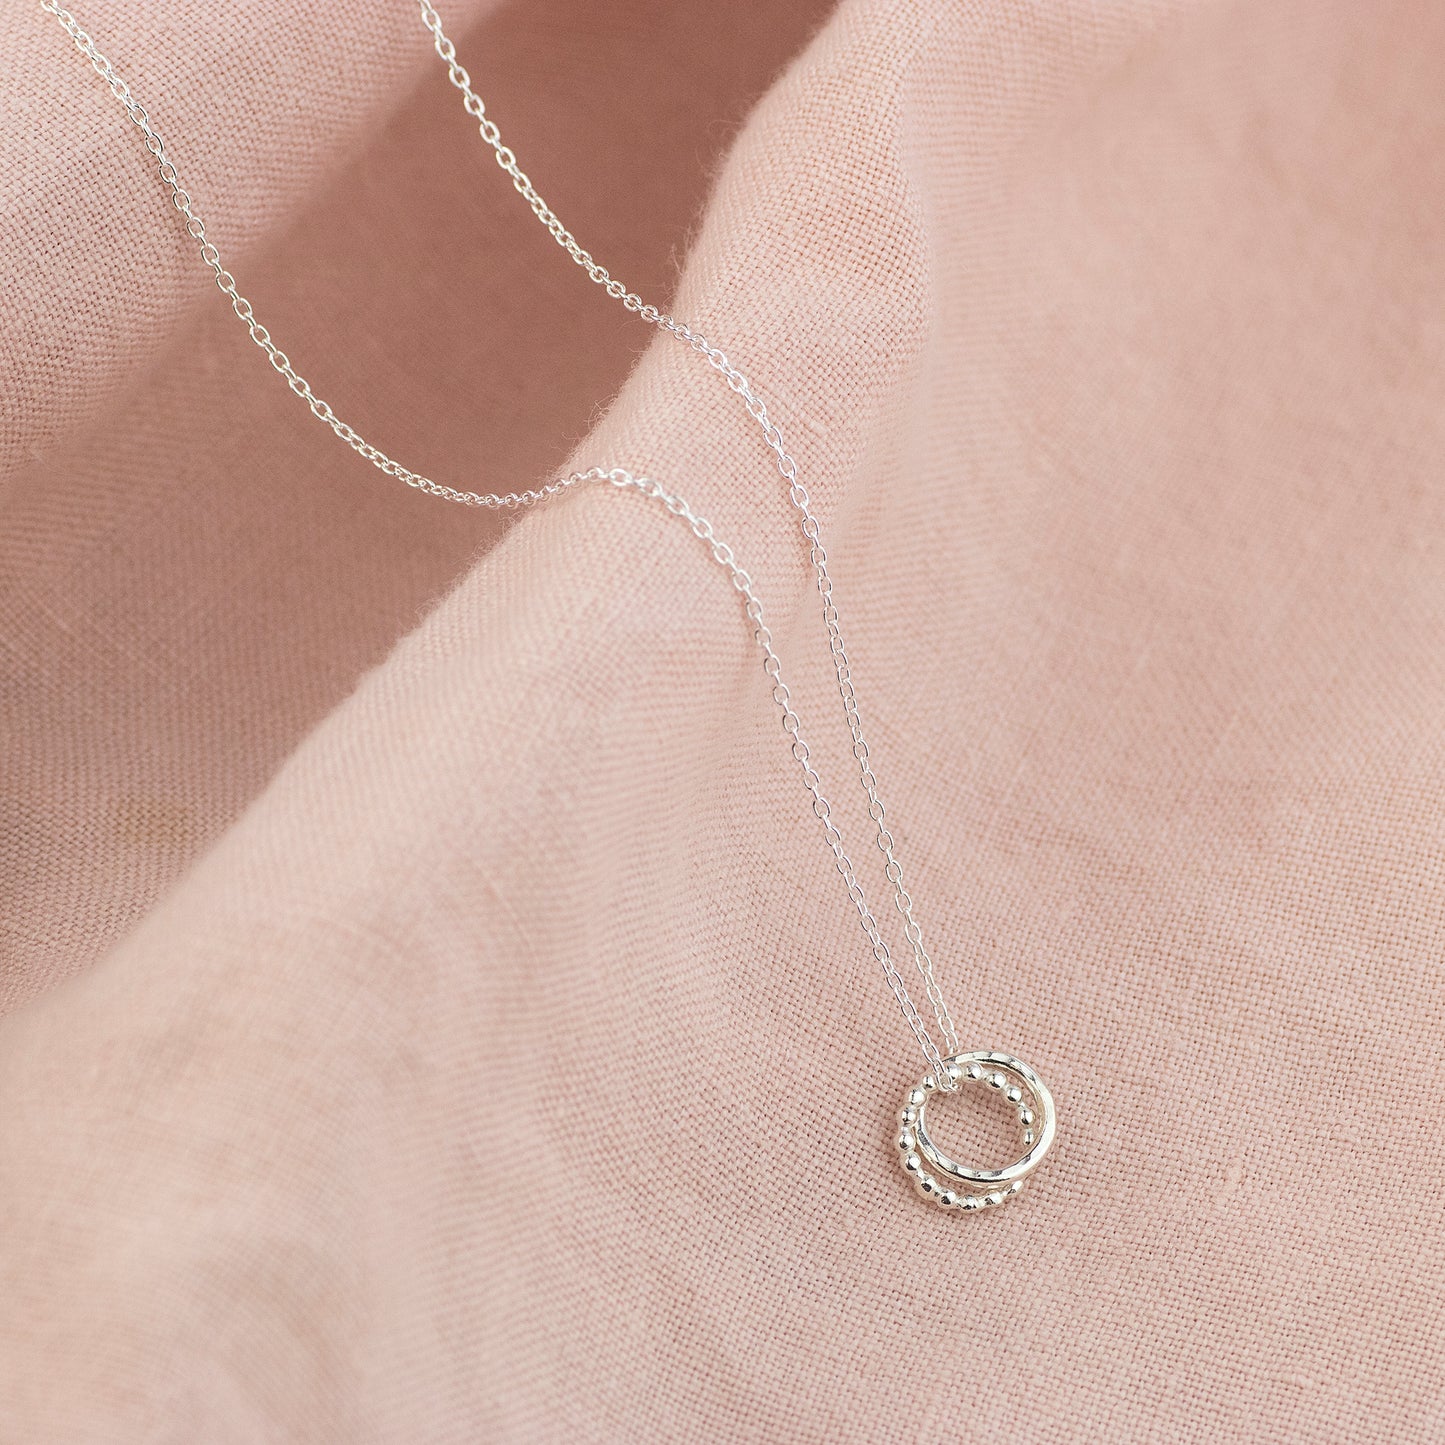 2nd Anniversary Necklace - The Original 2 Links for 2 Years Necklace - Silver Love Knot